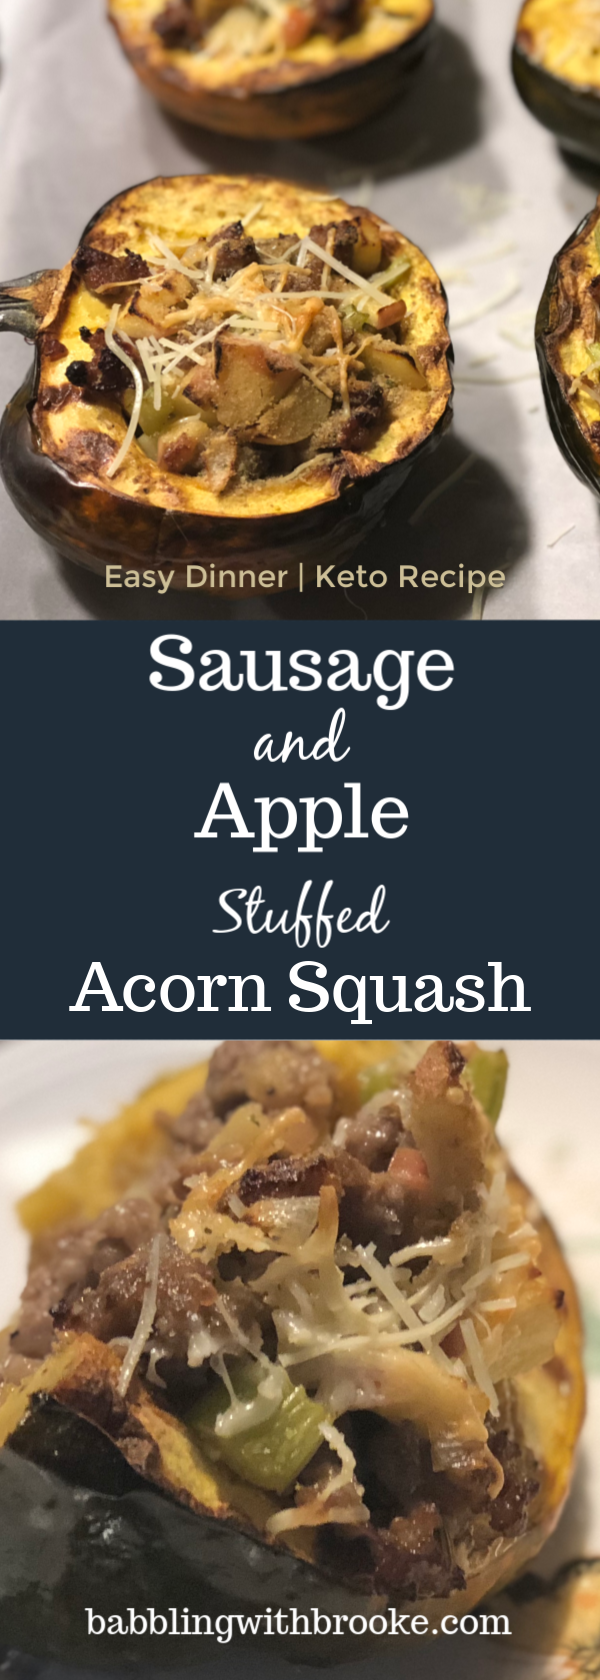 This delicious, easy dinner recipe is perfect for Fall. This sausage and apple stuffed acorn squash is easy to make and is keto too. Perfect for the healthy eater or busy family. #healthydinnerrecipe #ketodinnerrecipe #ketorecipe #easydinnerrecipe #falldinnerrecipe #fallfood #squashrecipes